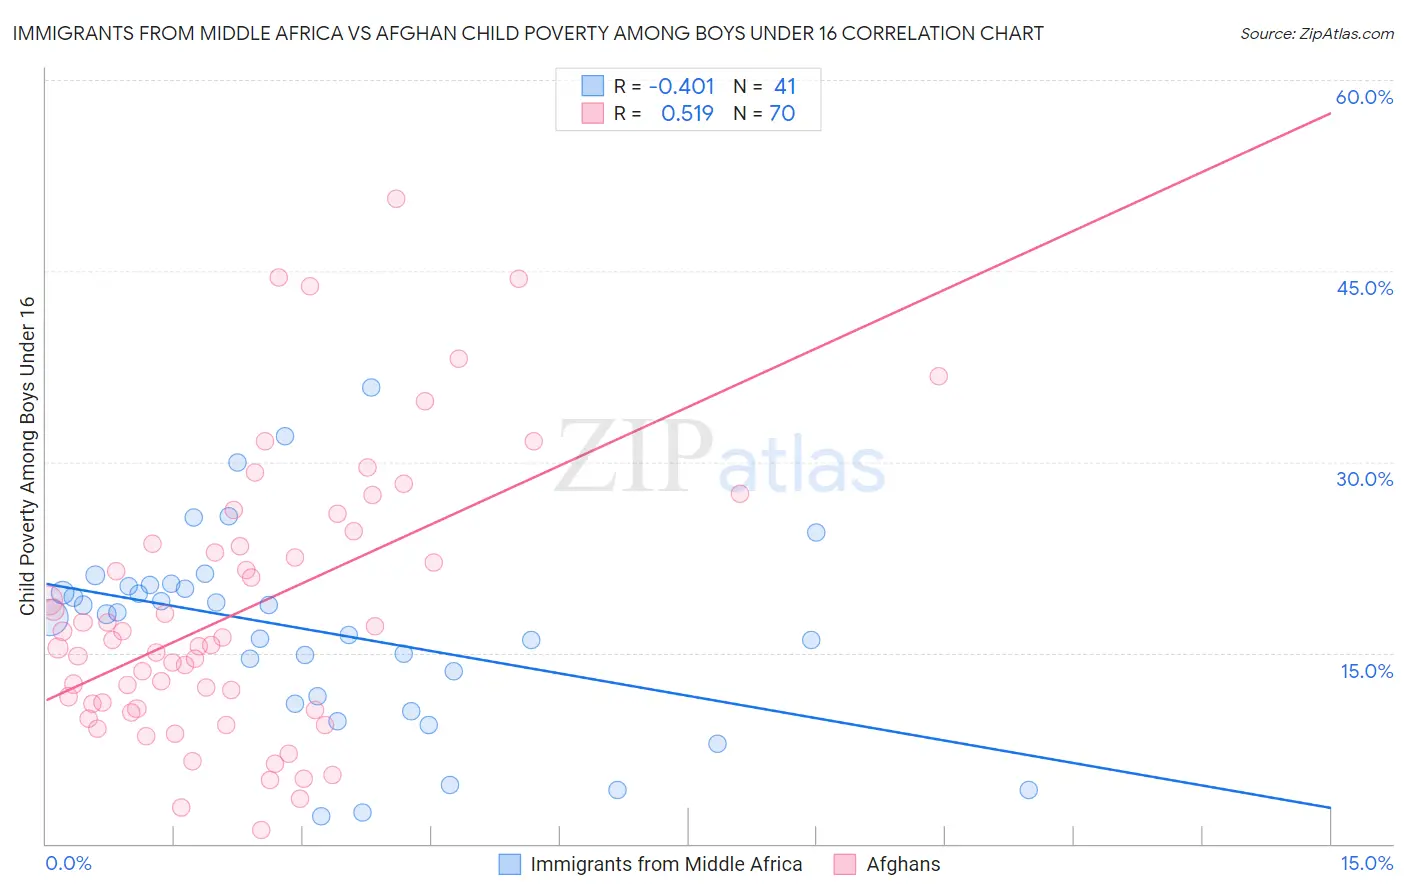 Immigrants from Middle Africa vs Afghan Child Poverty Among Boys Under 16